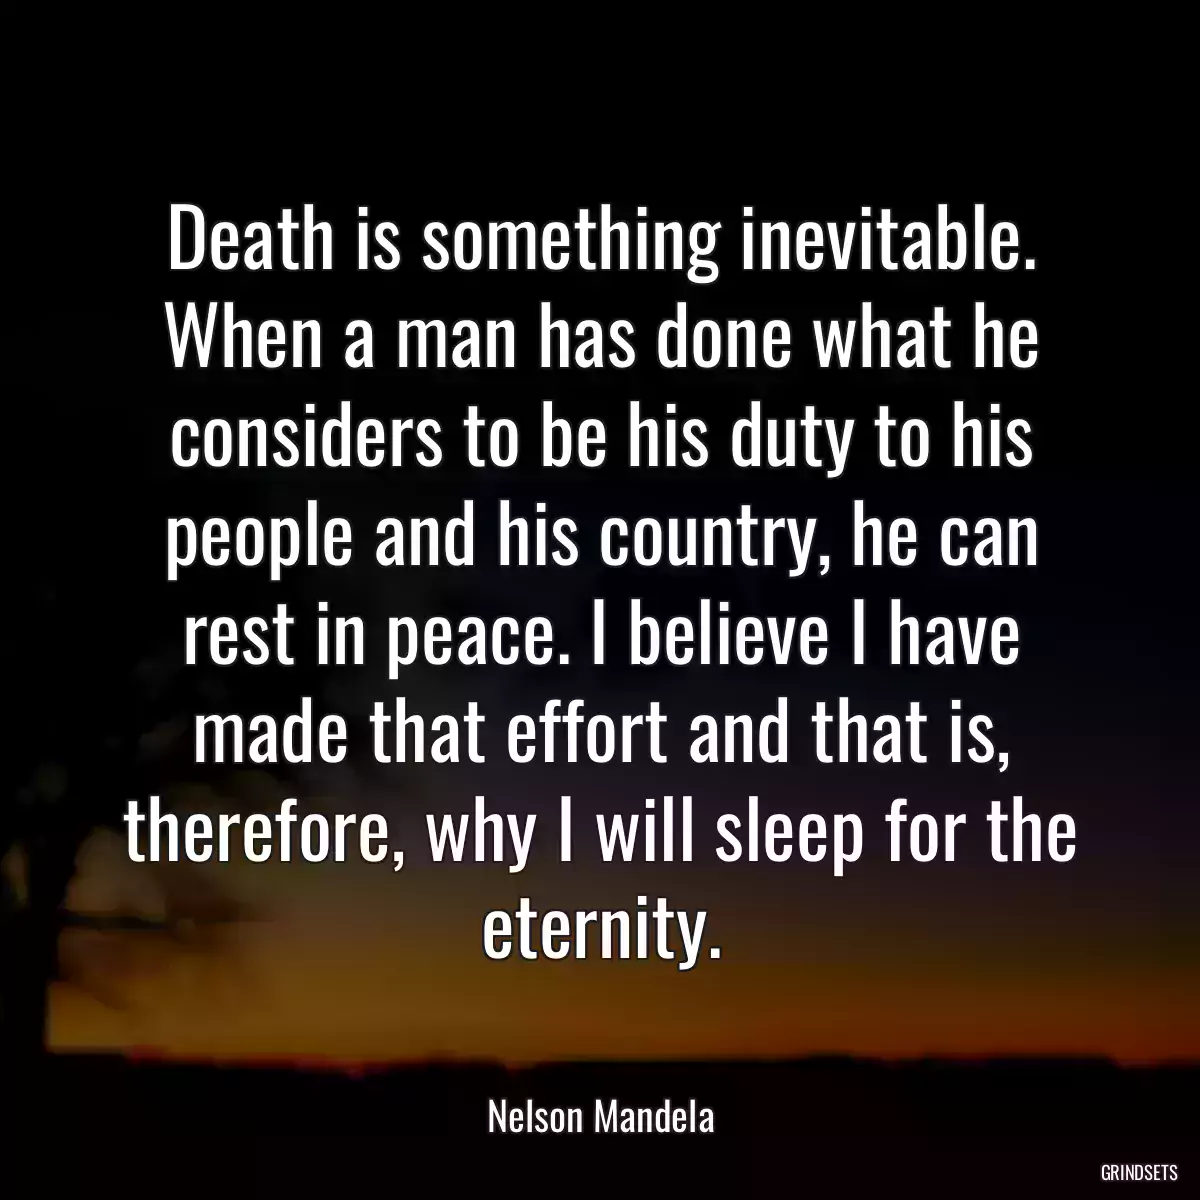 Death is something inevitable. When a man has done what he considers to be his duty to his people and his country, he can rest in peace. I believe I have made that effort and that is, therefore, why I will sleep for the eternity.